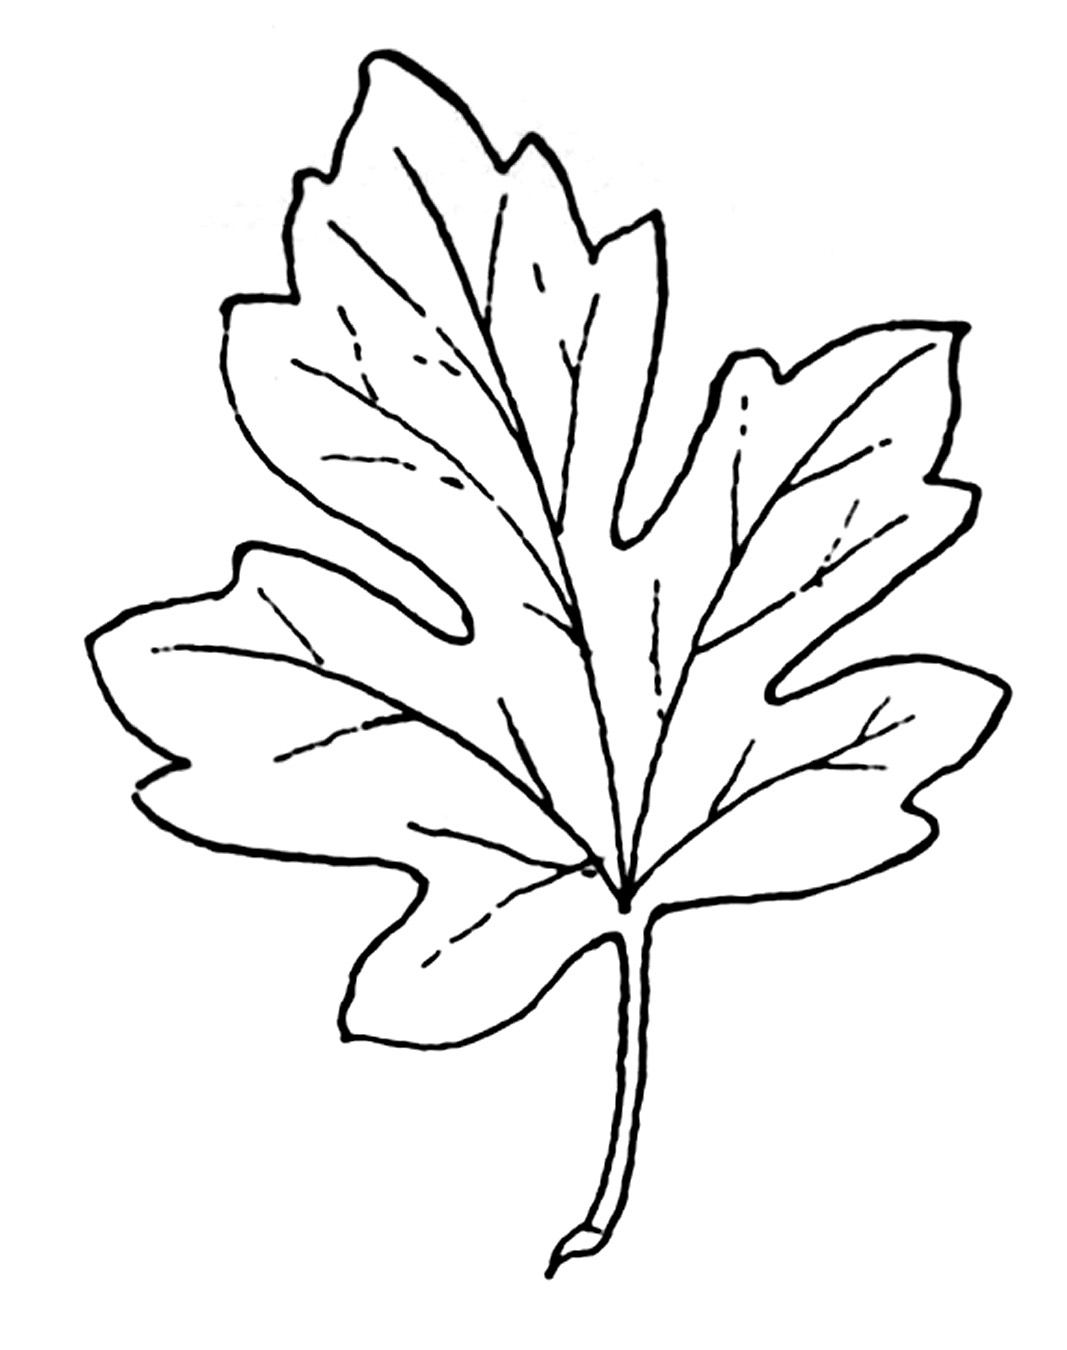 fall leaves clipart black and - Leaf Clip Art Black And White